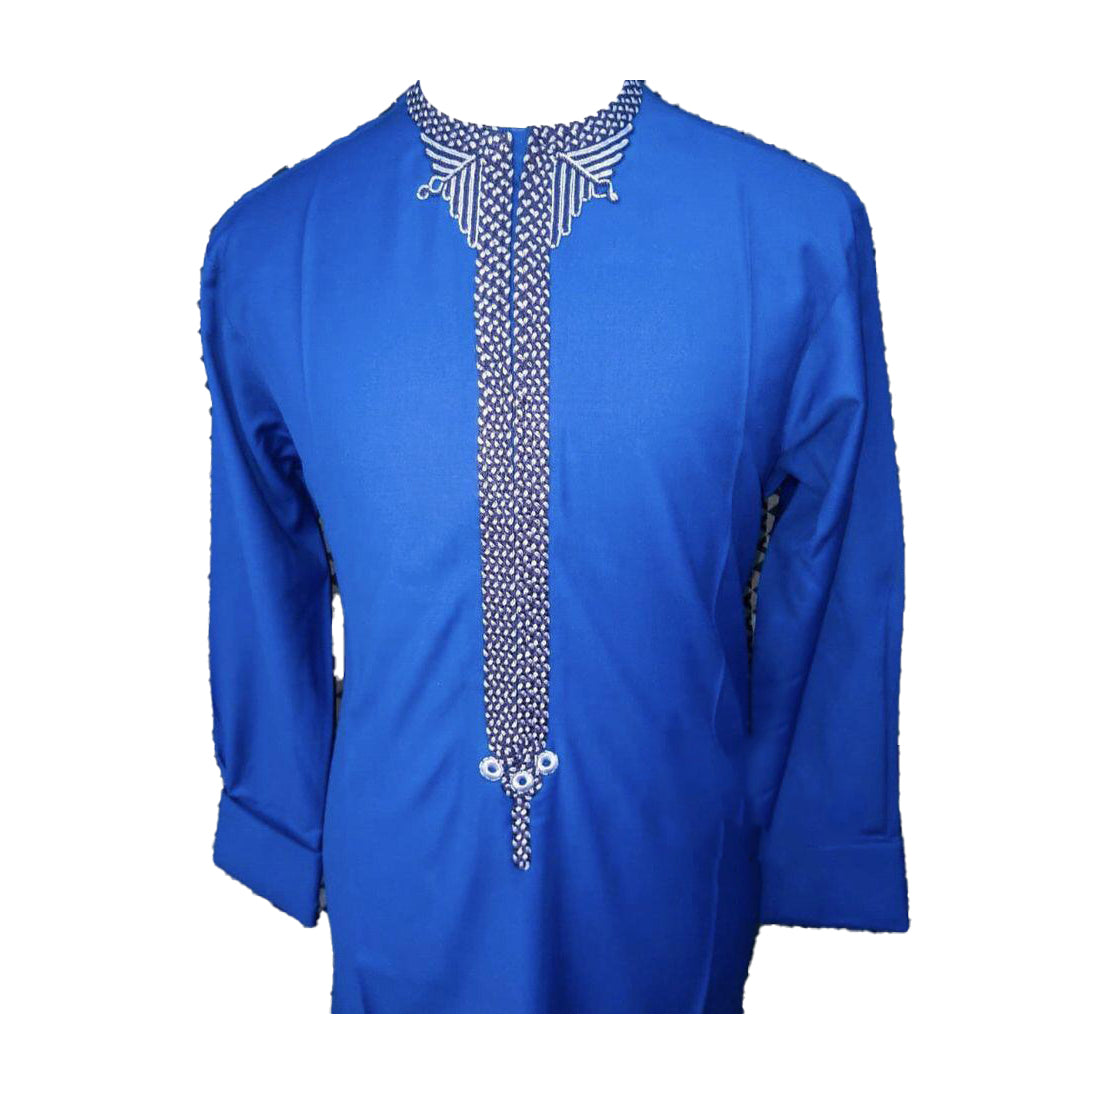 African Men's Wear Clothing Long Sleeve Two Piece Set Royal Blue Tops Shirt